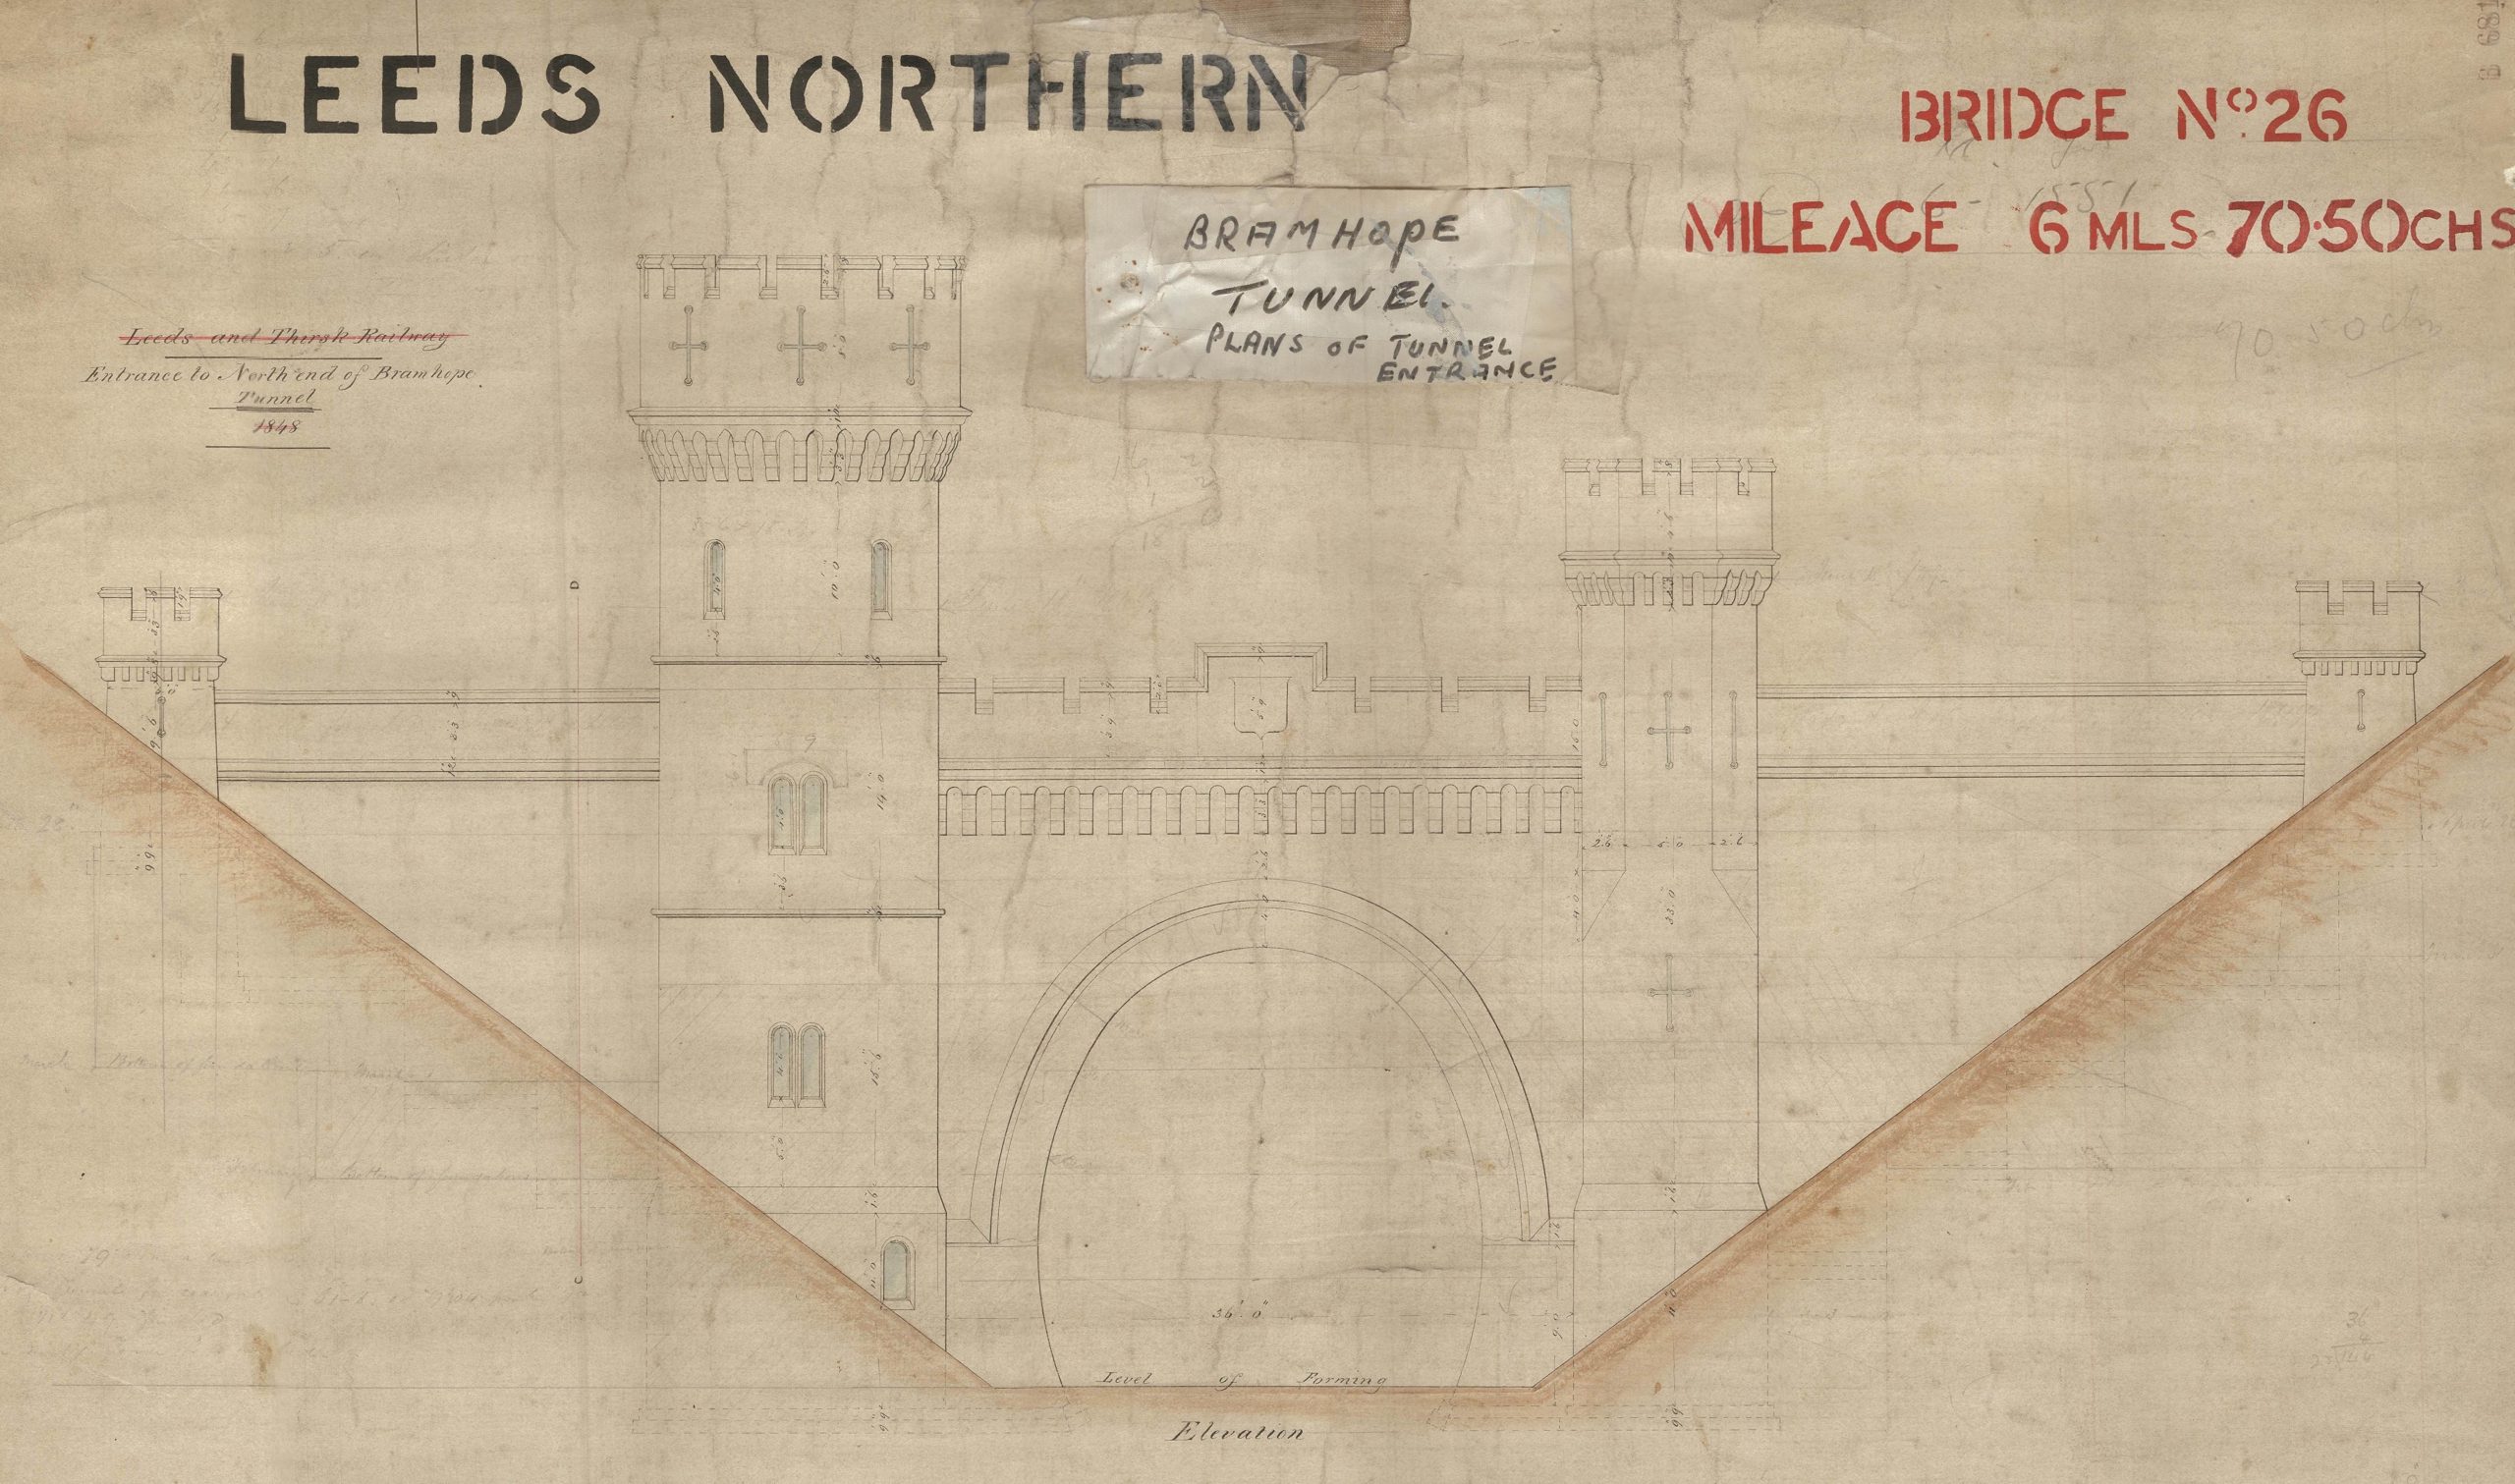 Original drawing from the Network Rail archive of the Bramhope Tunnel's North portal